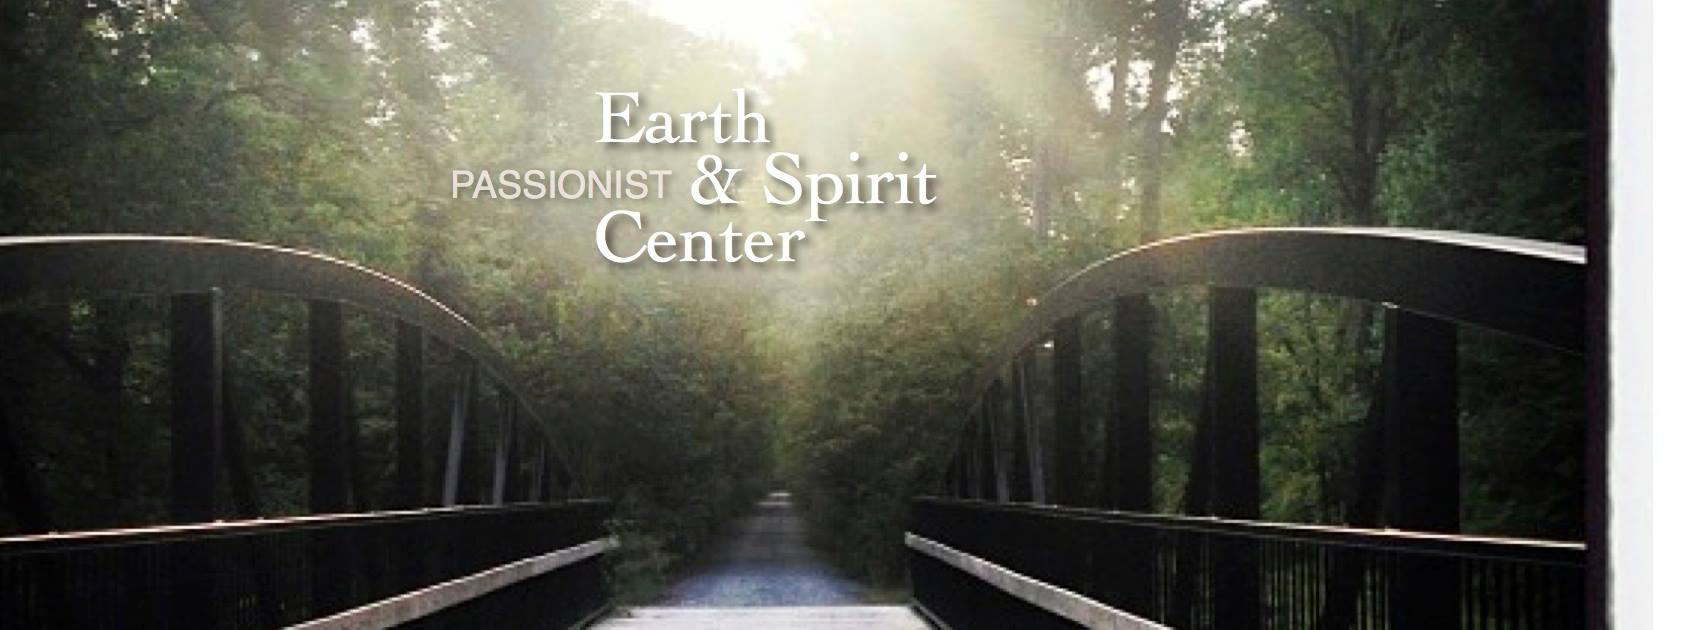 Passionist Earth and Spirit Center Kentucky United States